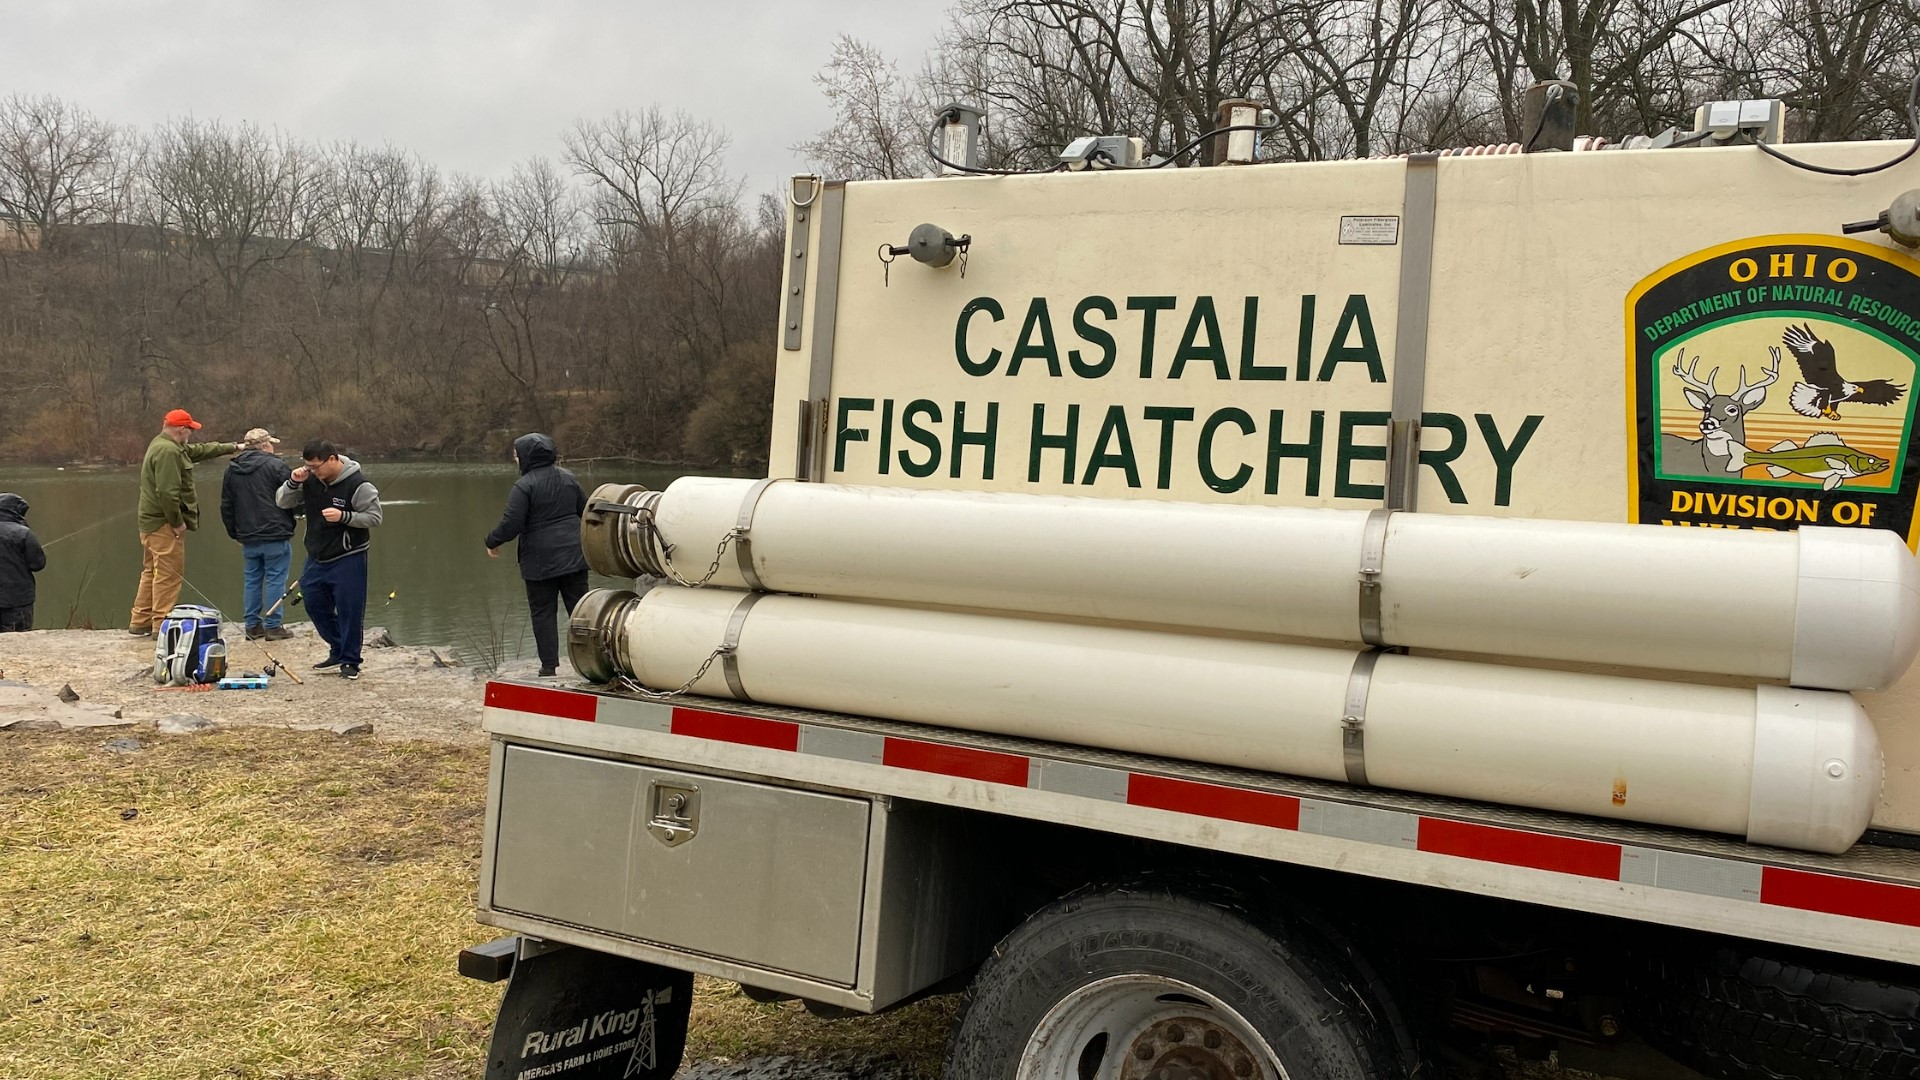 Approximately 84,000 rainbow trout will be released in 88 lakes and ponds in Ohio.